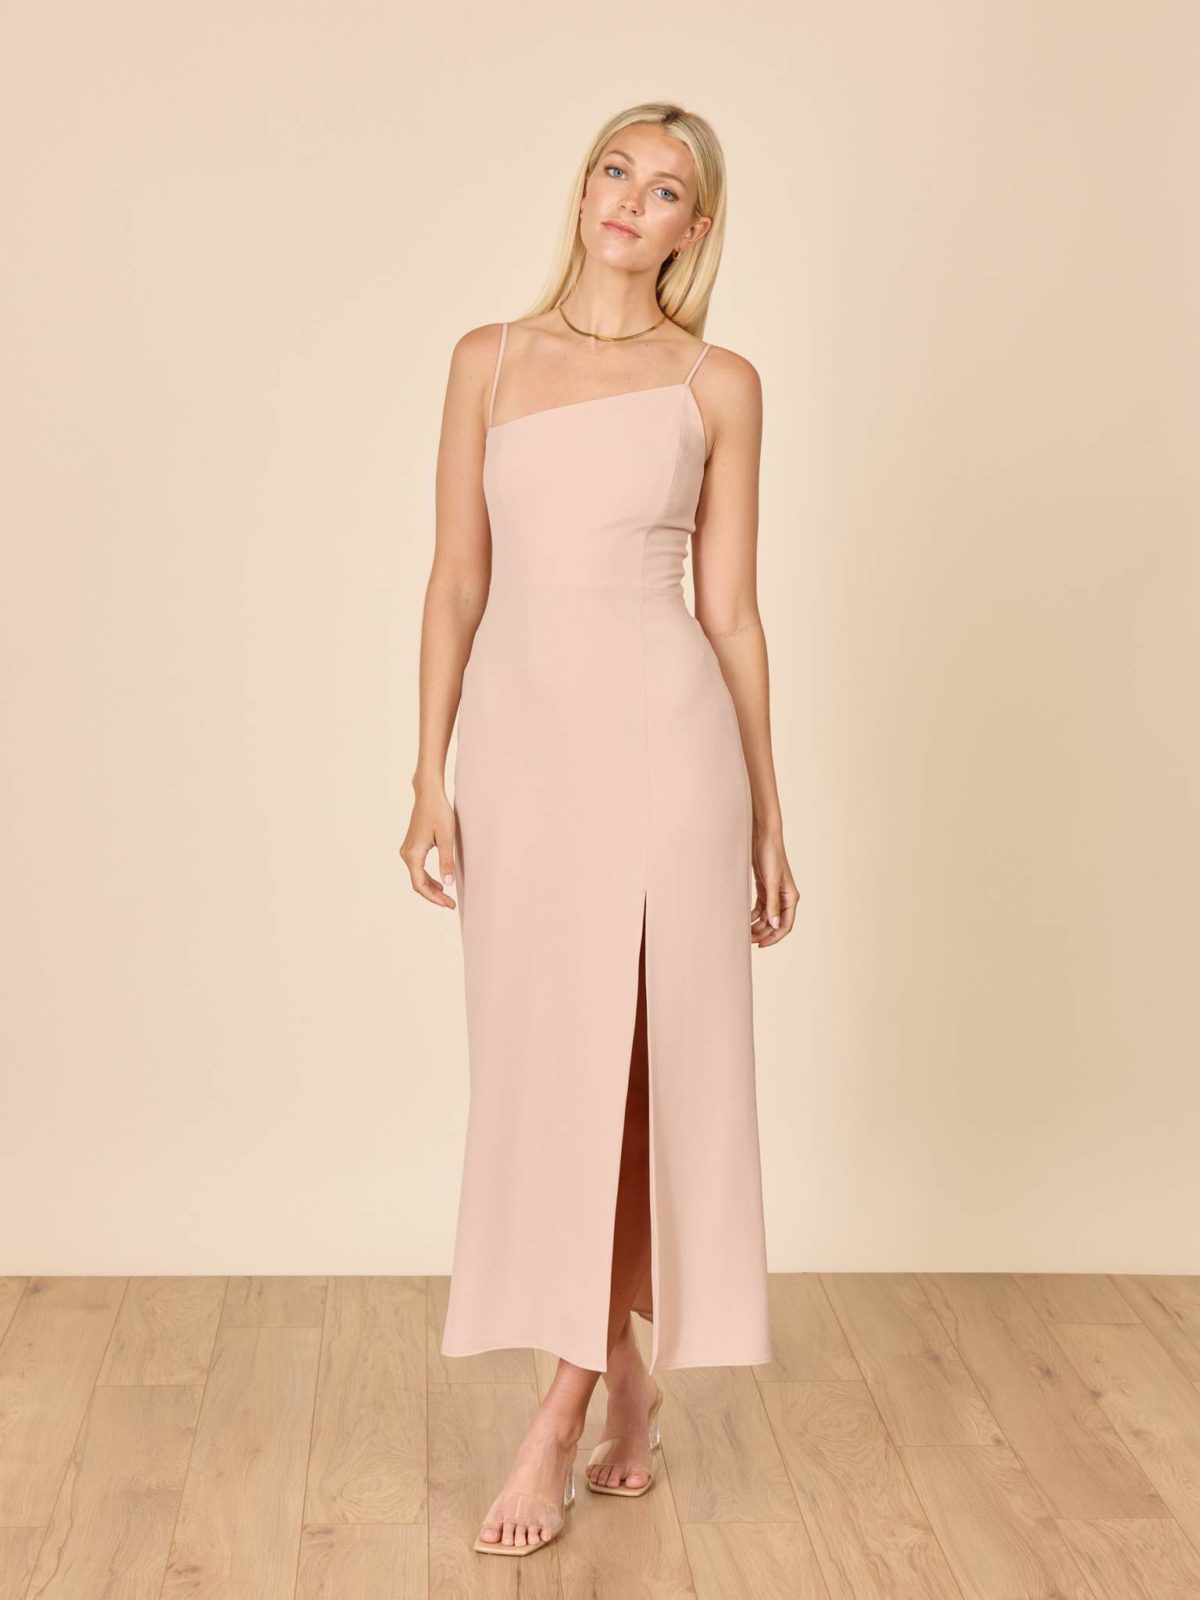 Bridesmaids Dresses for Fall in blush hues